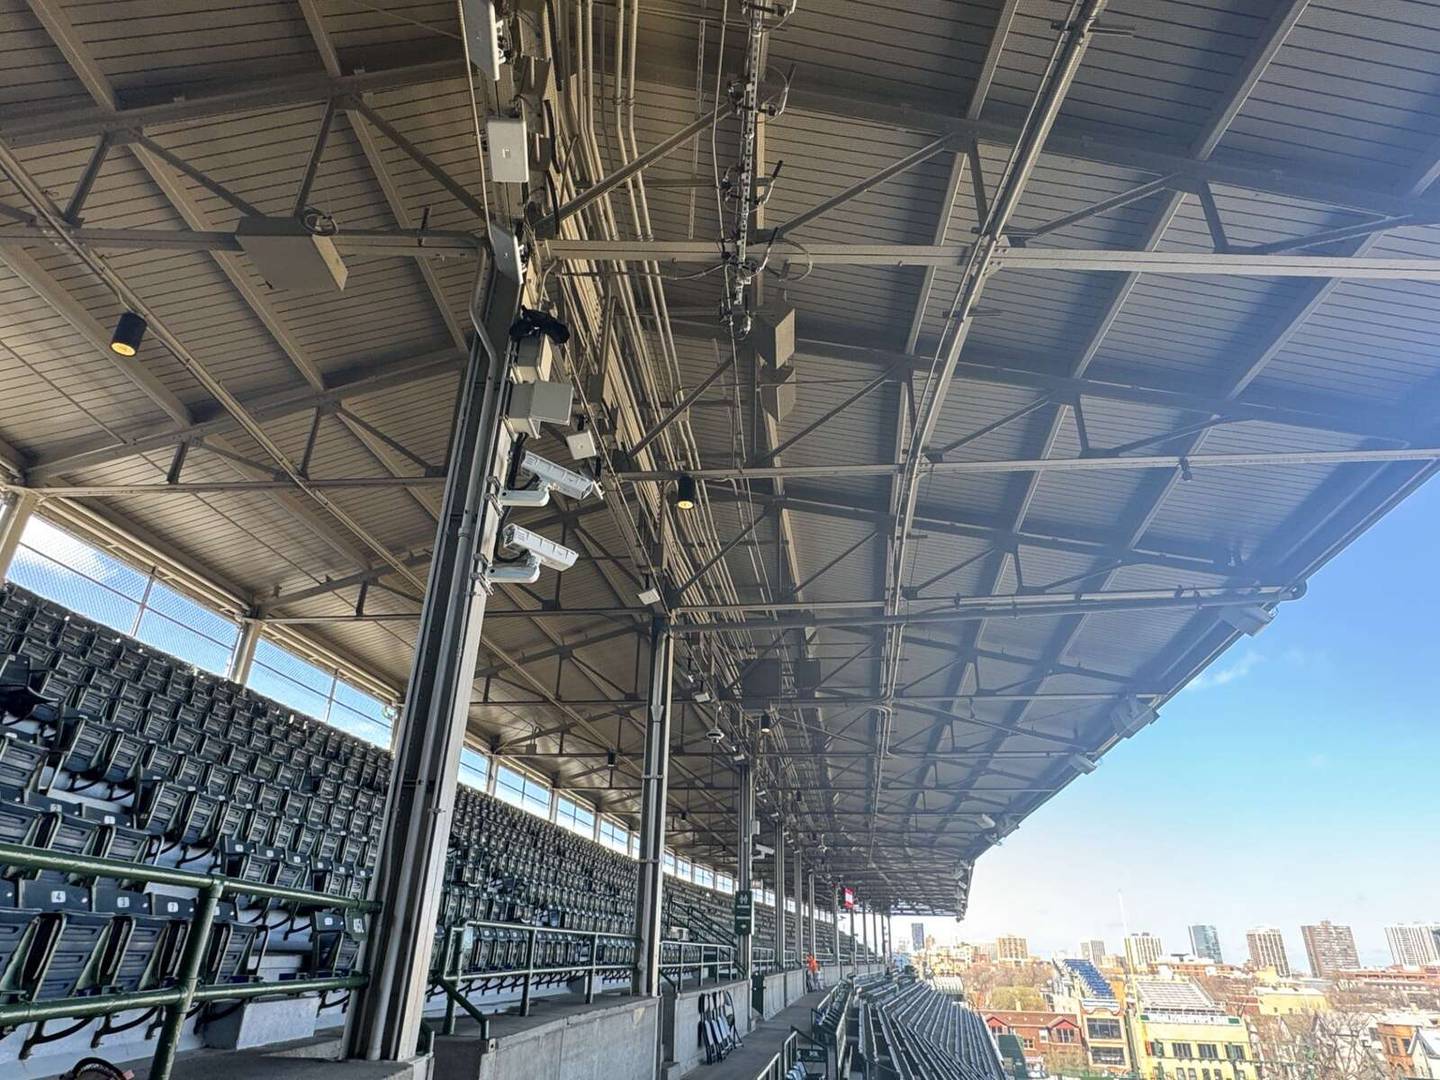 A view of the new upper deck roof at Wrigley Field, which was installed during the offseason.